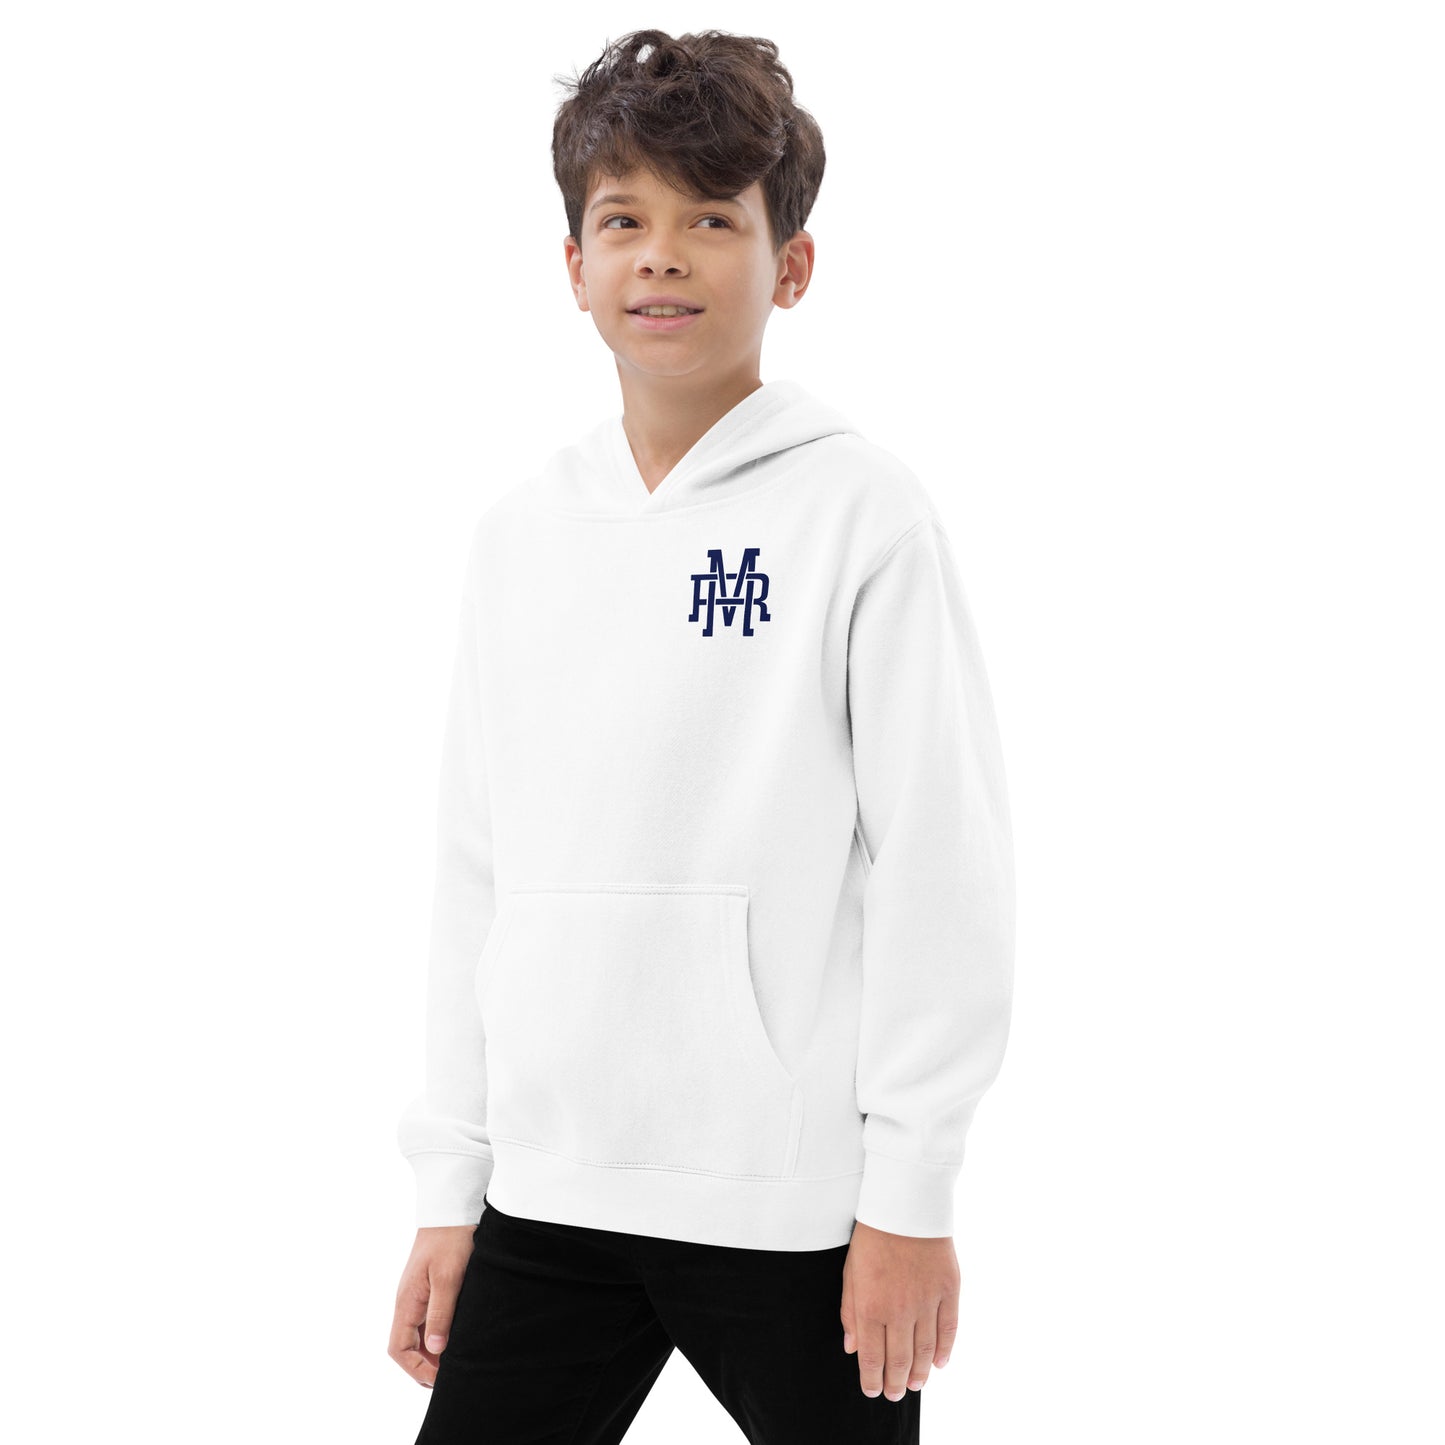 Kids Hoodie - MR with Paws